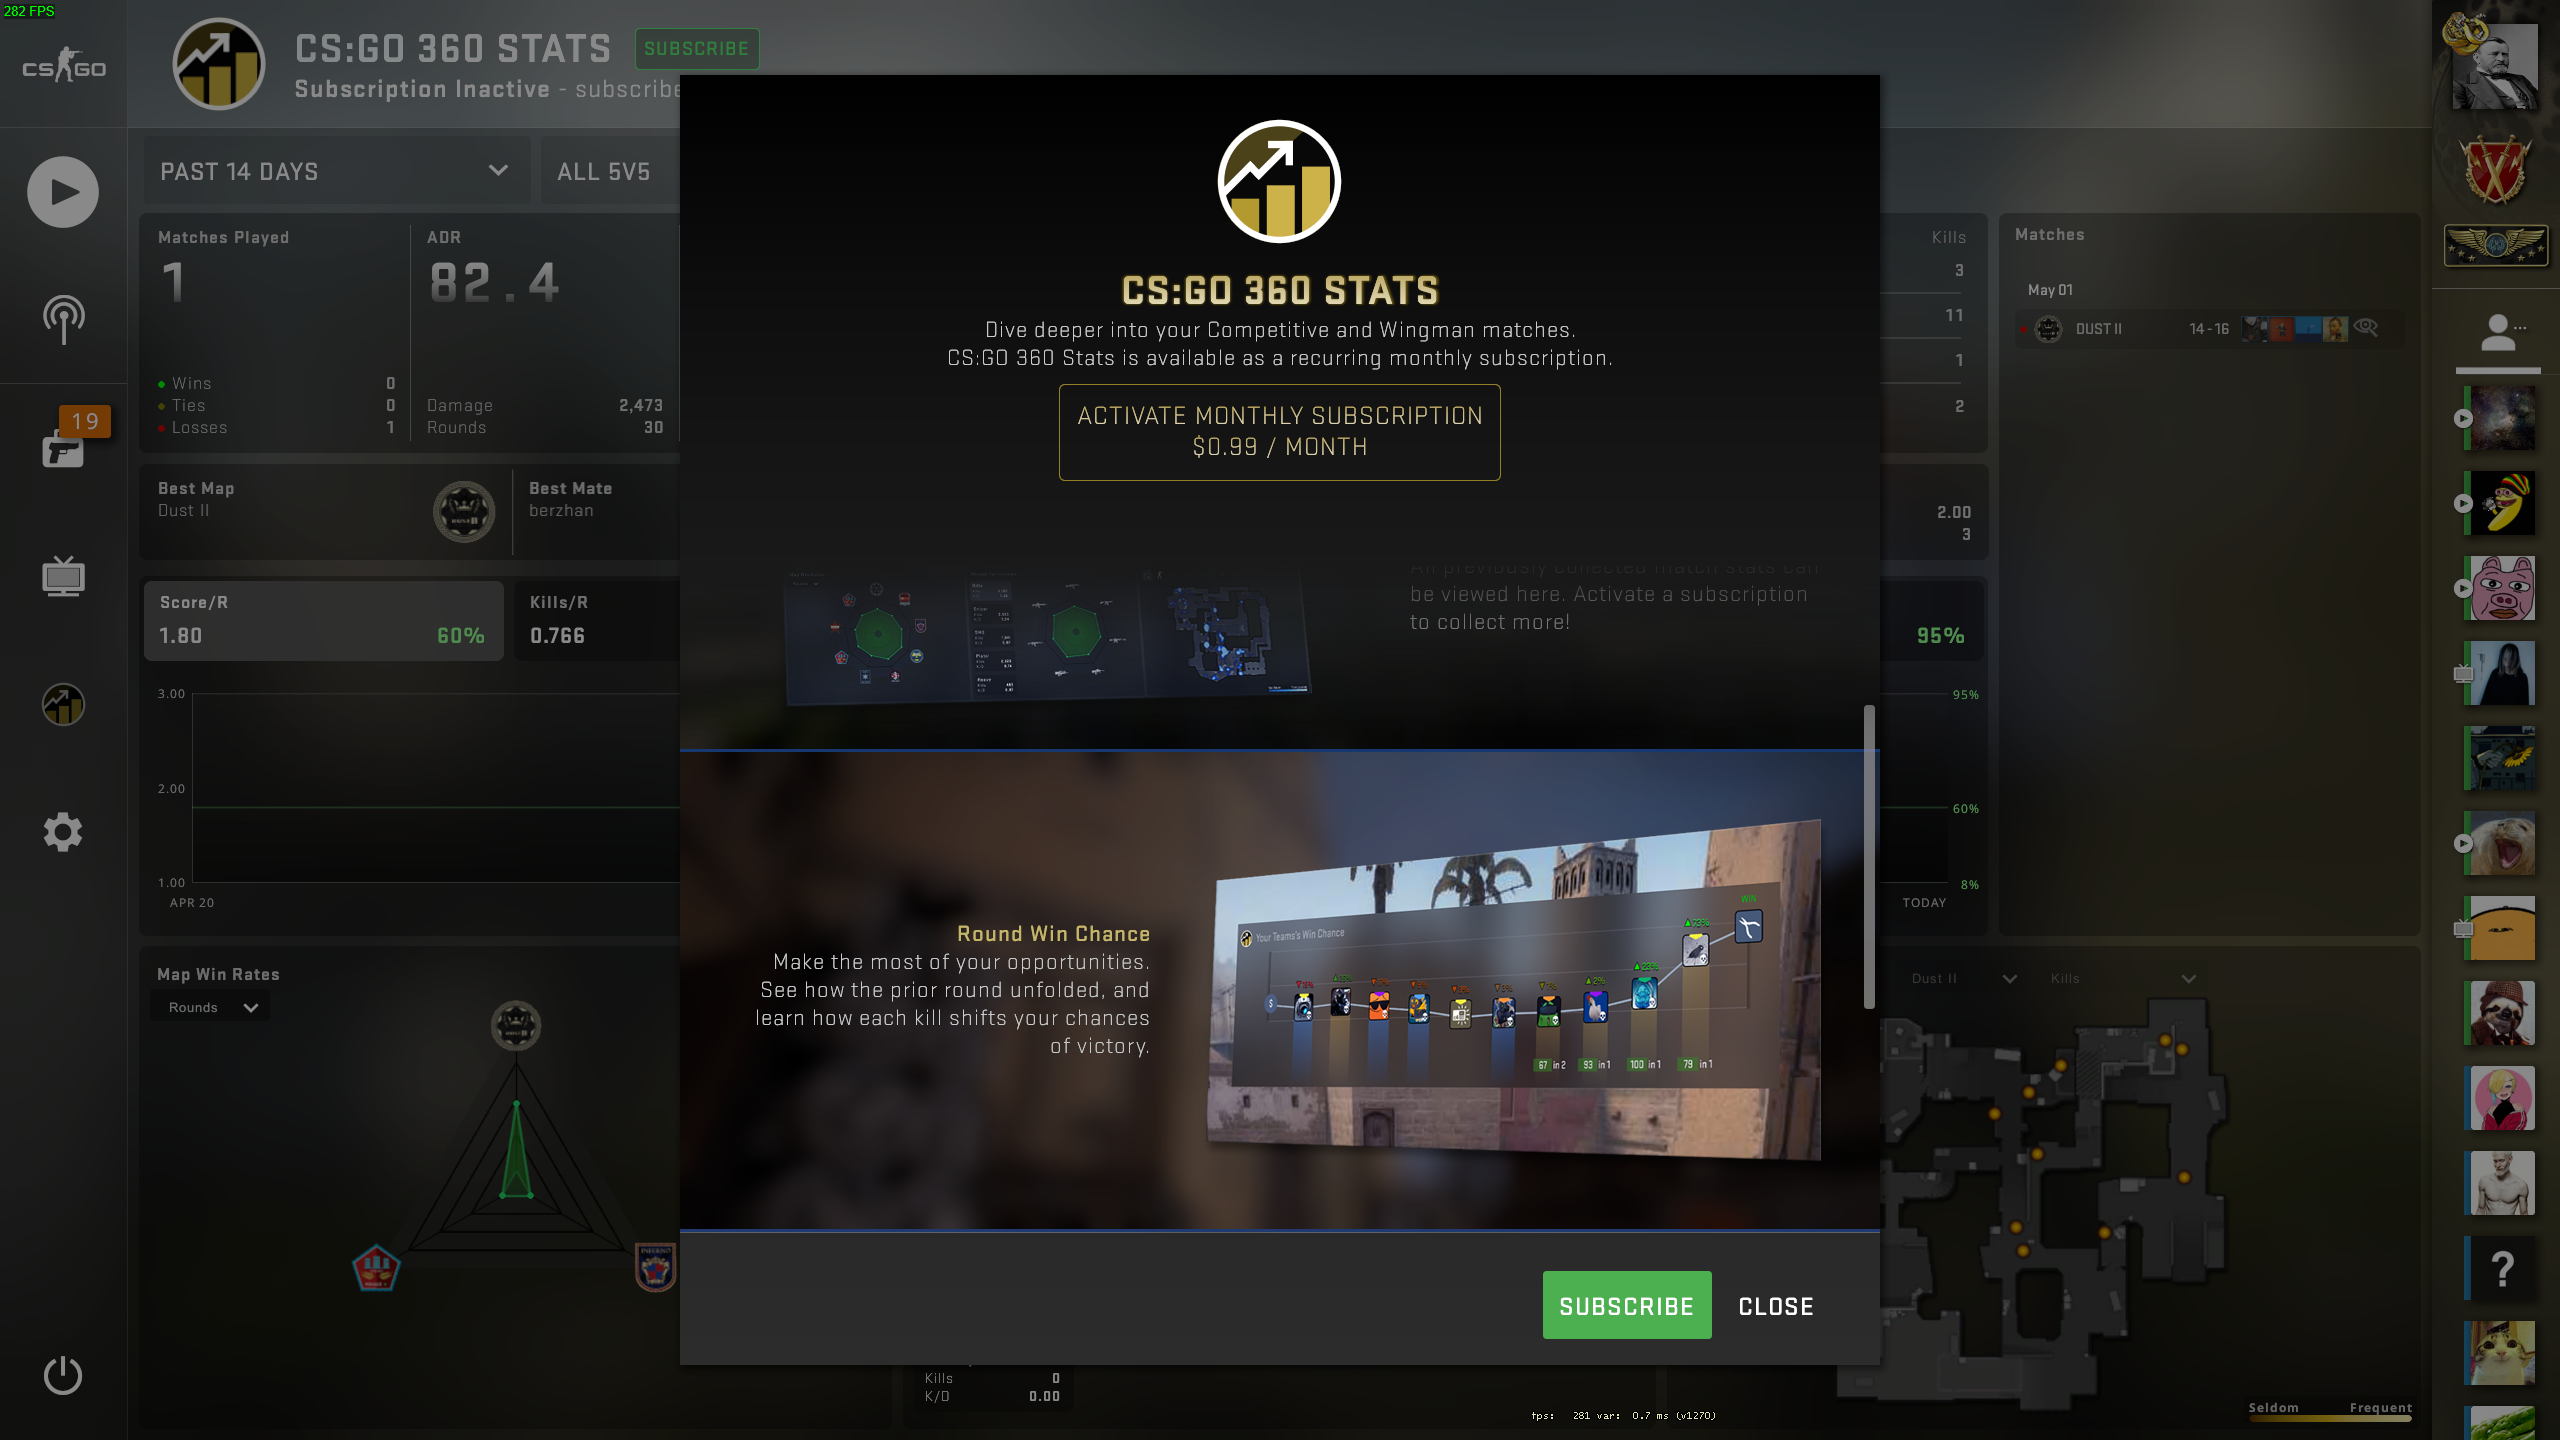 A screenshot of CS:GO 360 Stats, showing an interface with some text and numbers on it. It's a stats subscription service for Counter-Strike Global Offensive.